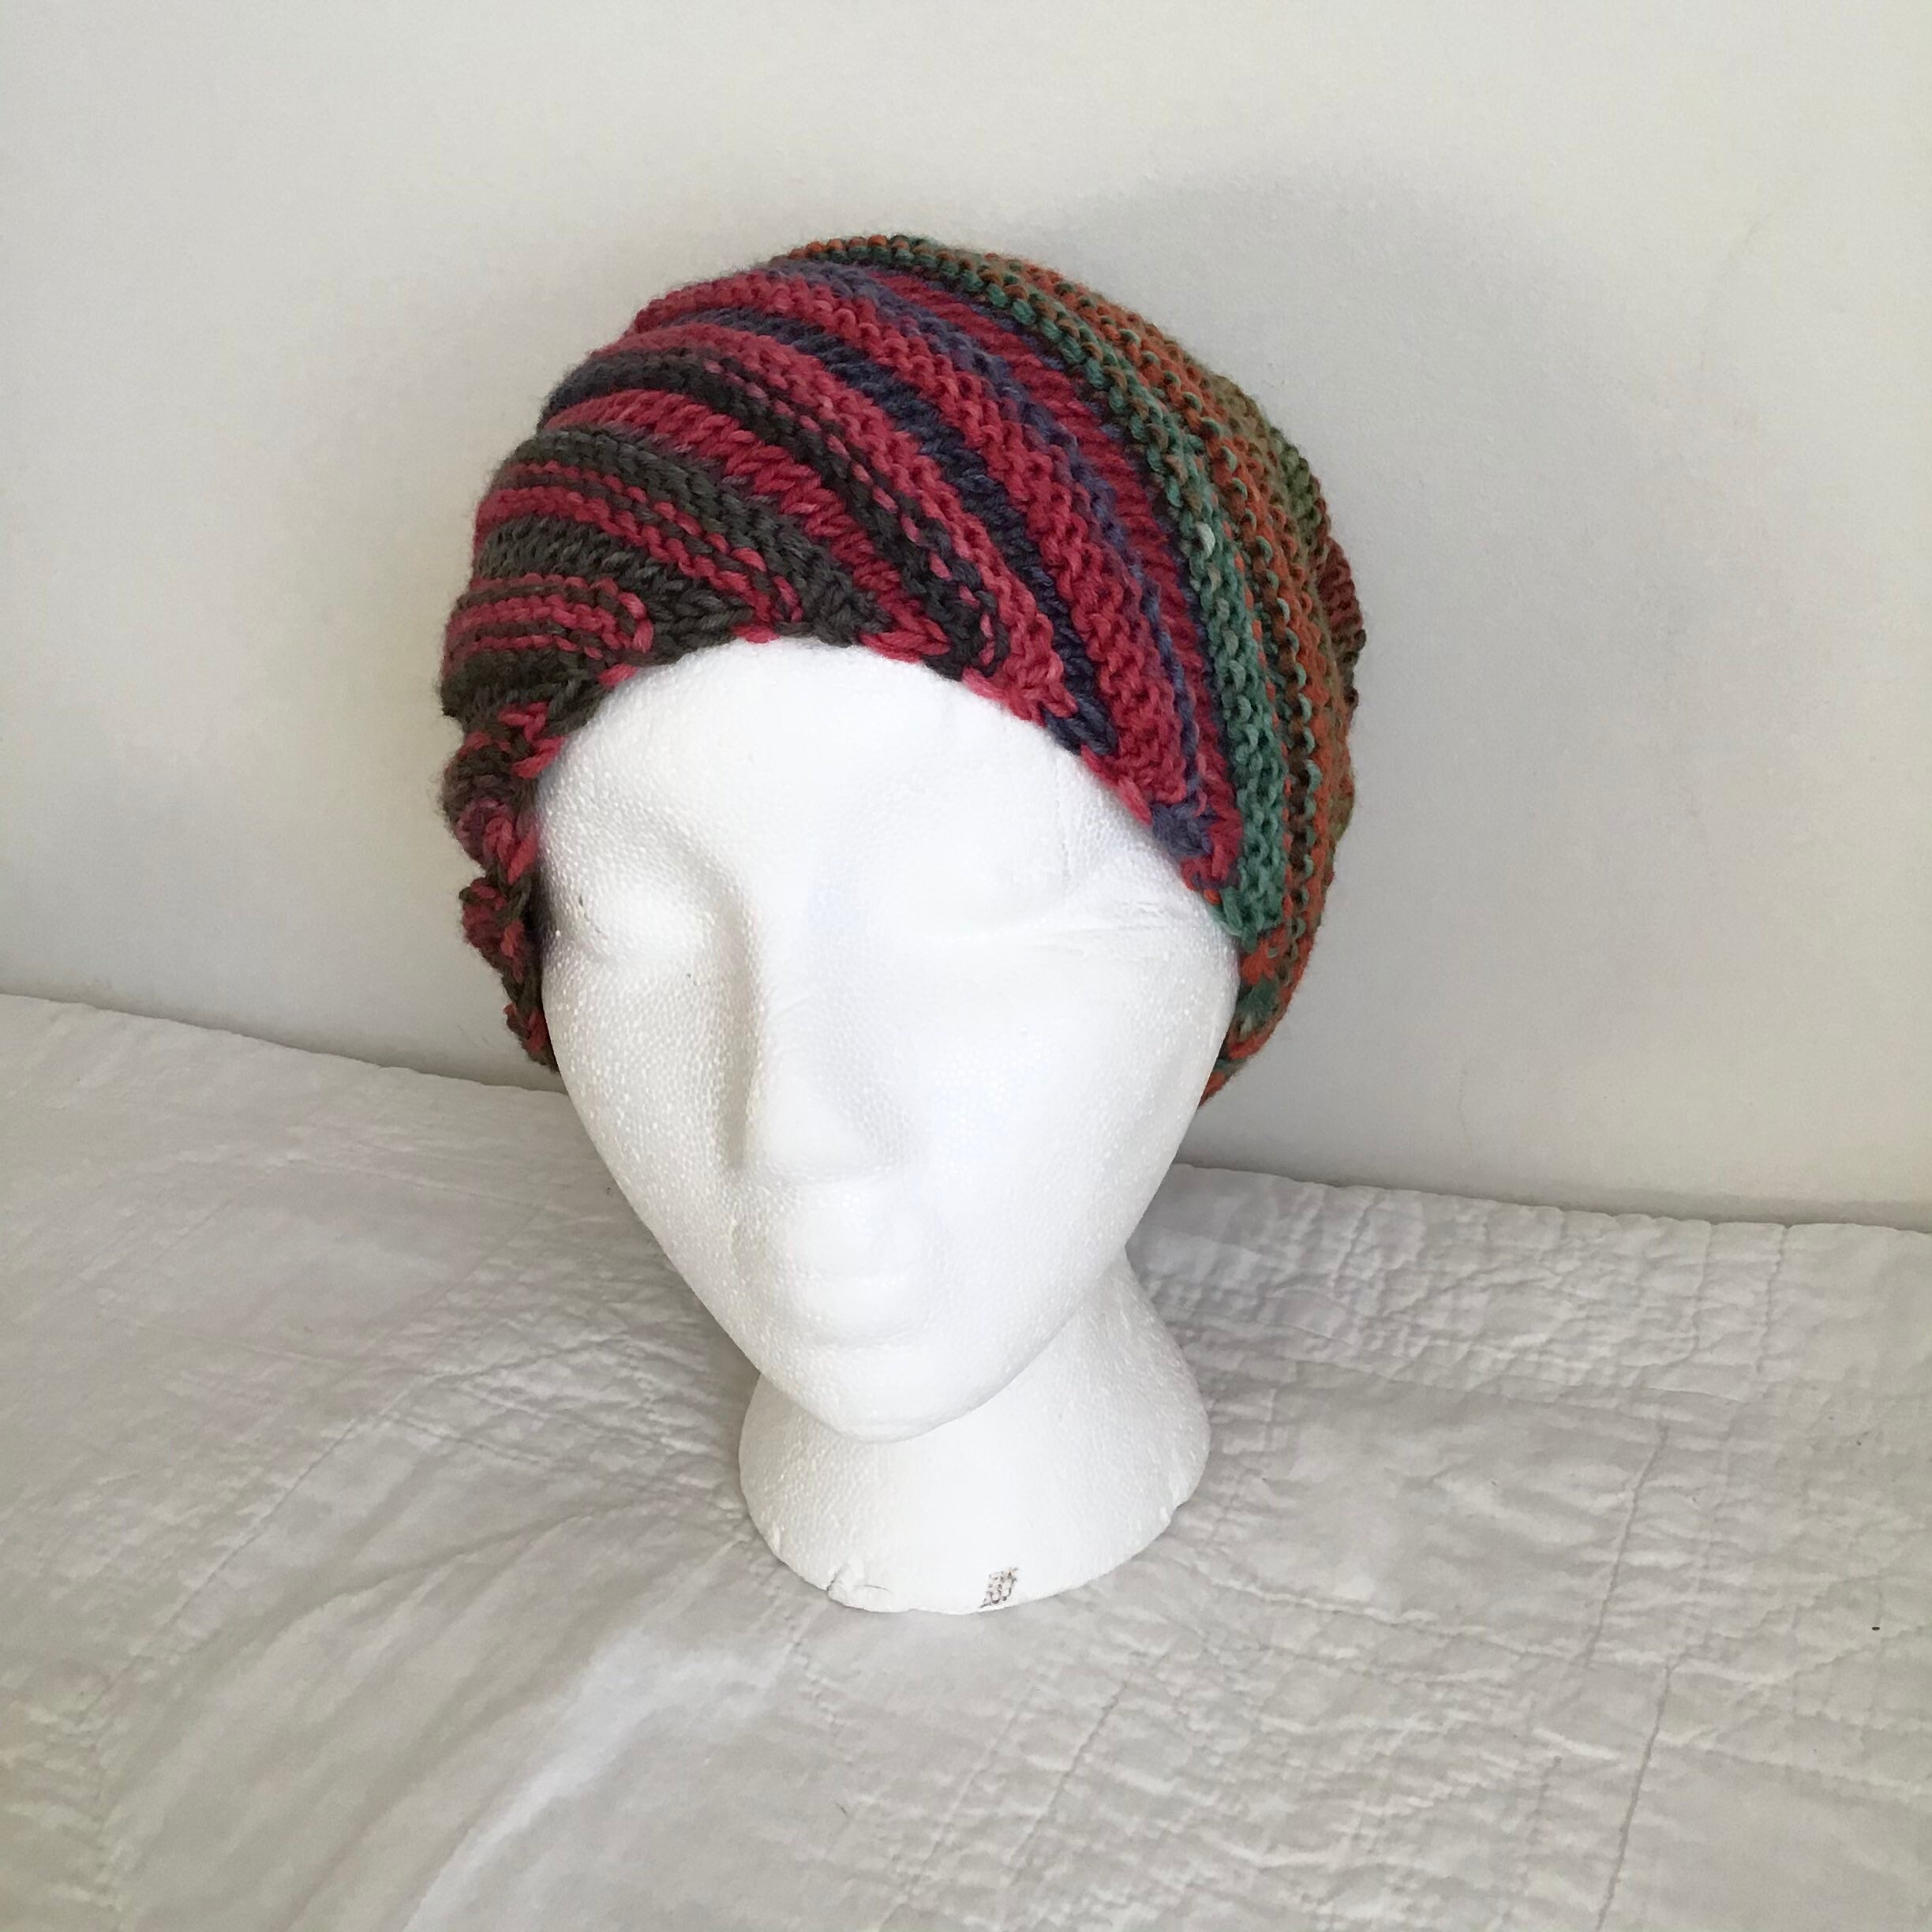 Colorful wool beanie snail hat sustainable eco-friendly | Etsy